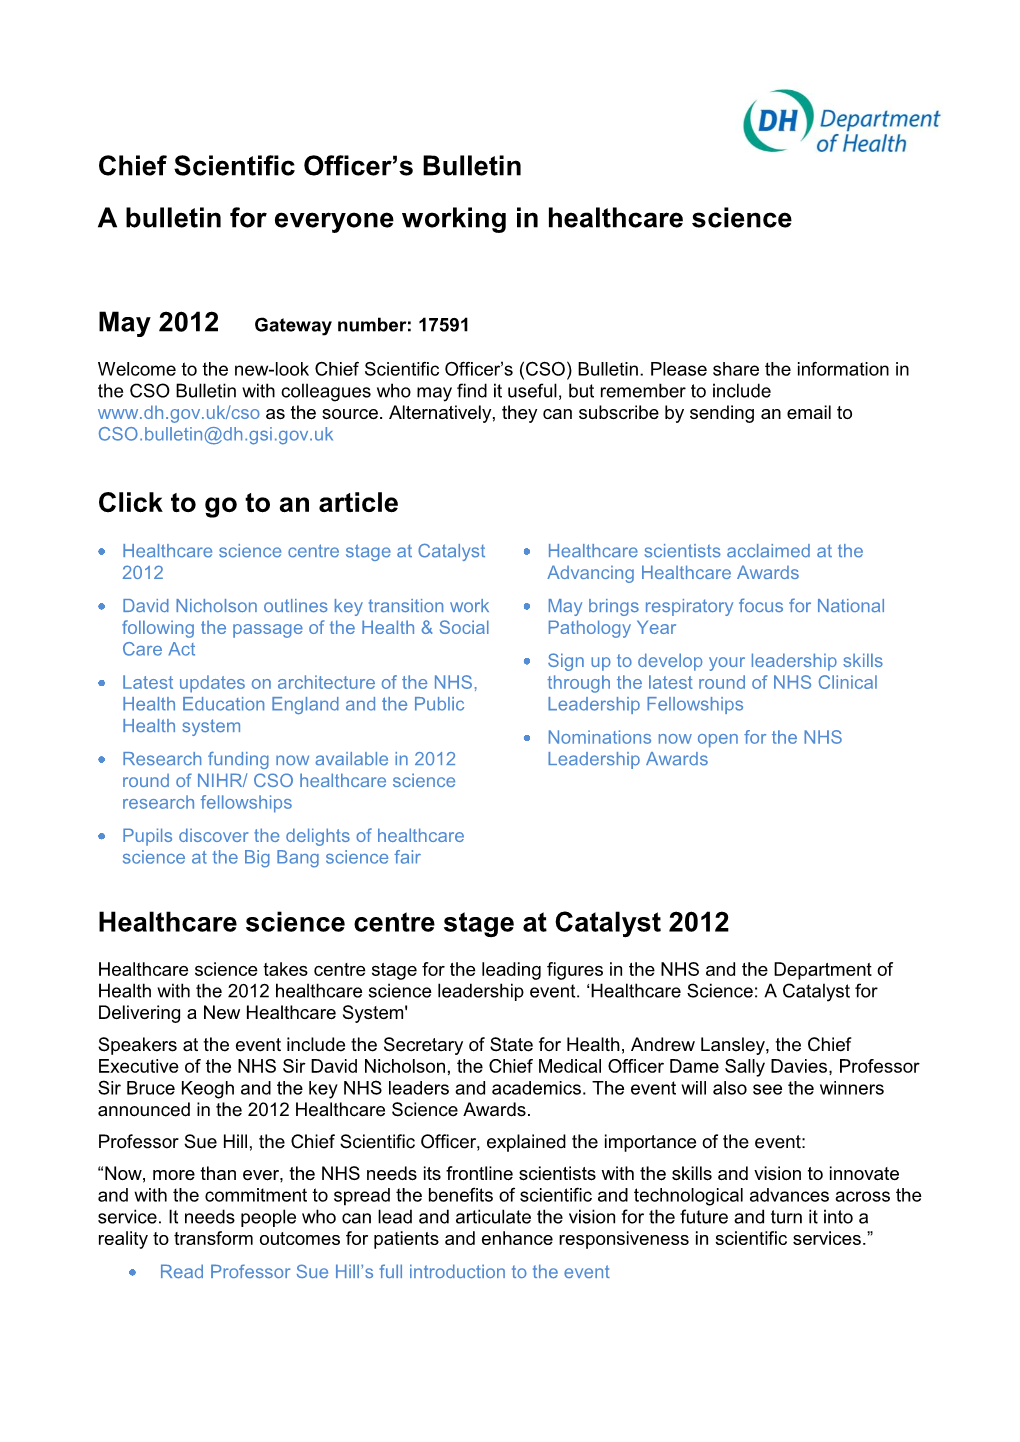 The Chief Scientific Officer's Bulletin